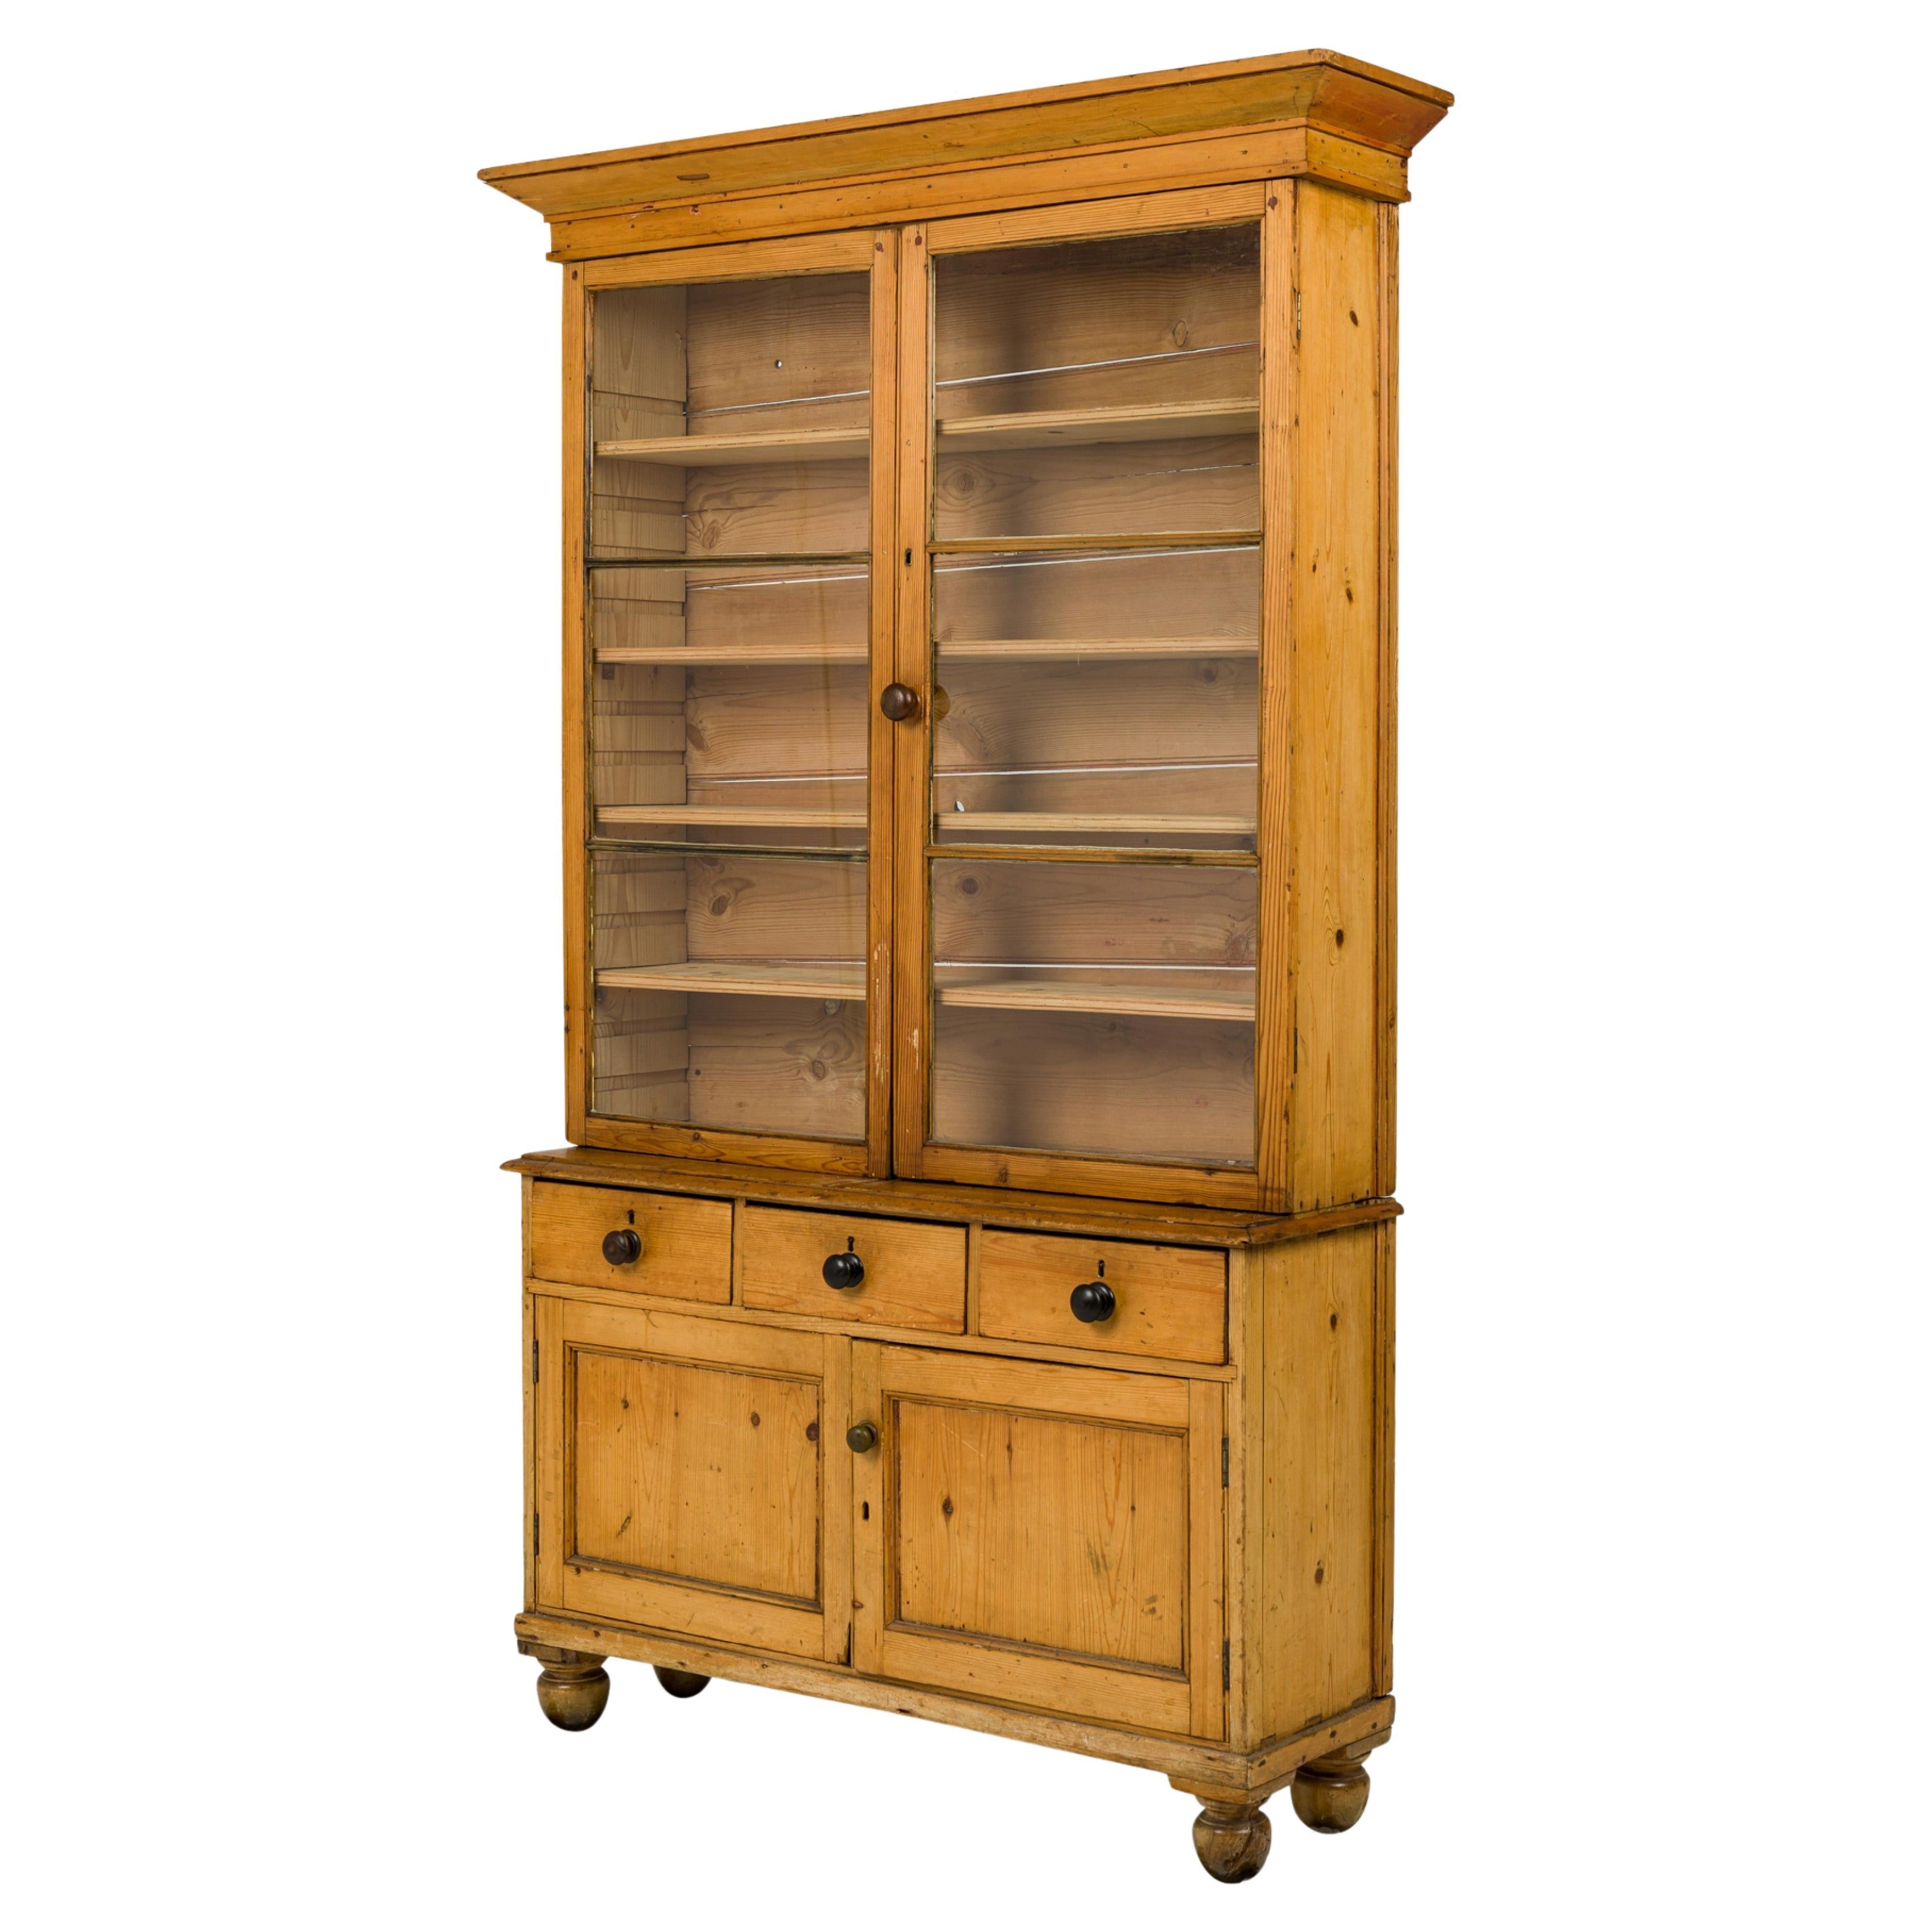 English Country Pine Wood Breakfront Hutch / Cabinet